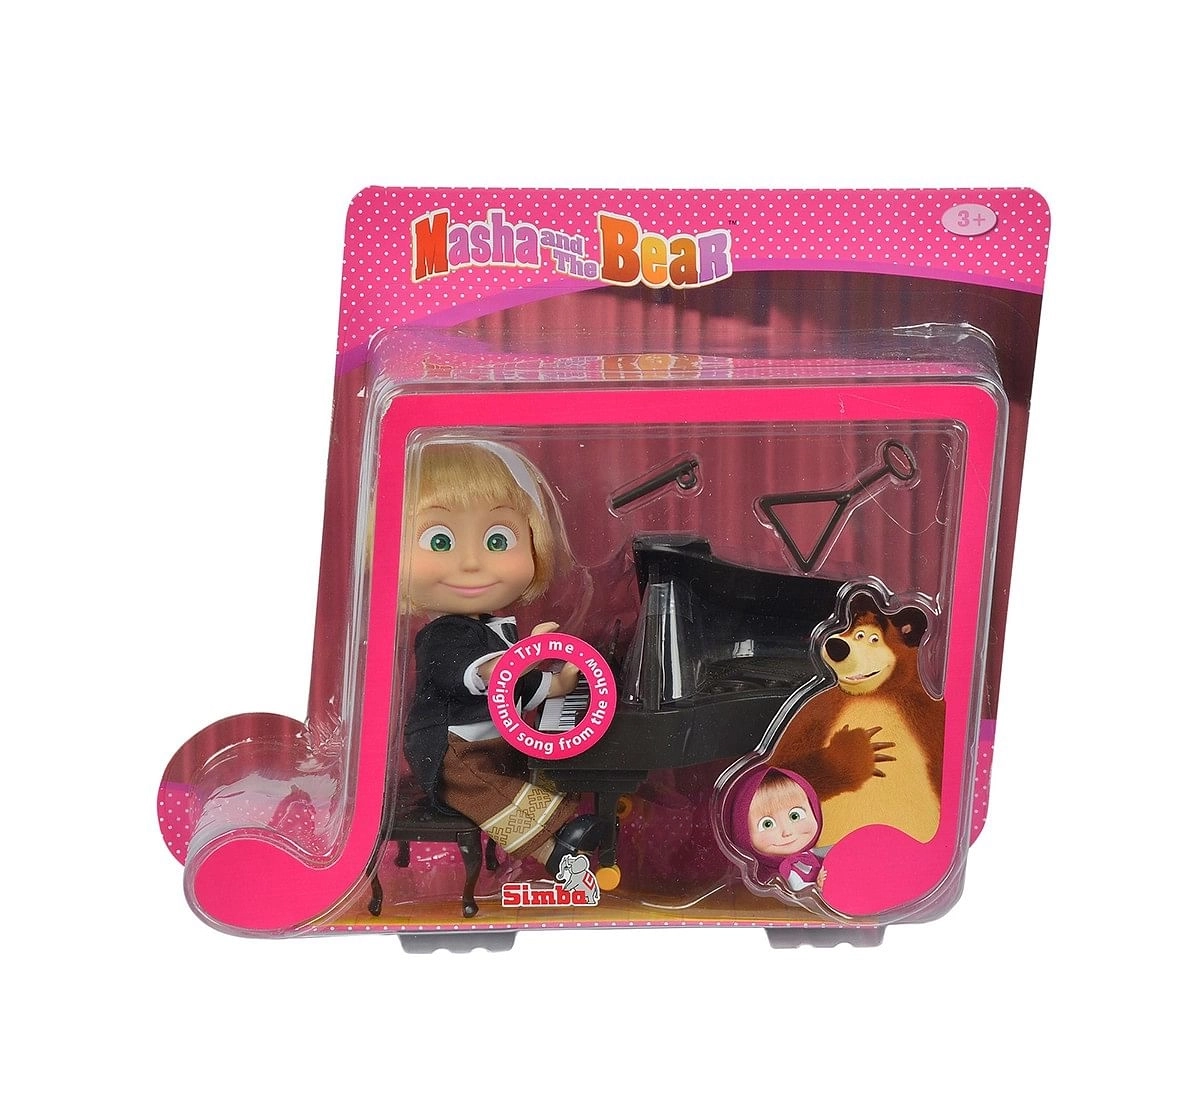 Masha And The Bear Masha Concert Pianist Roleplay sets for age 3Y+ (Black)